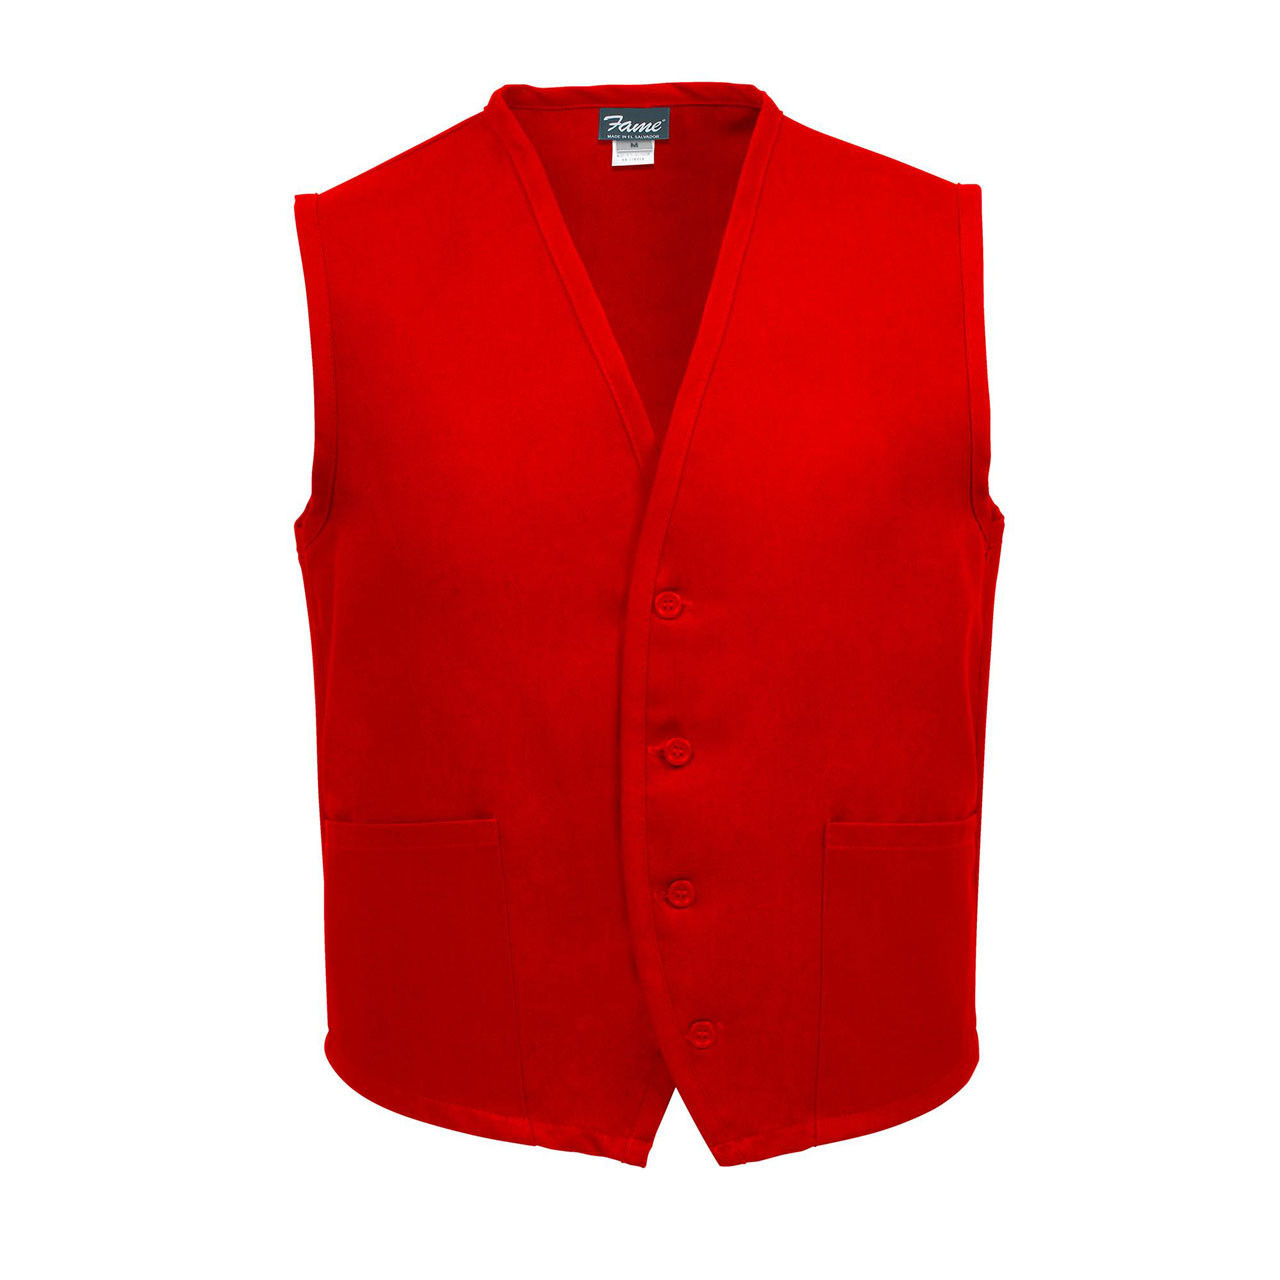 What is the color of the red vest in the Unisex Uniform Vest, 2 Pocket, Red?